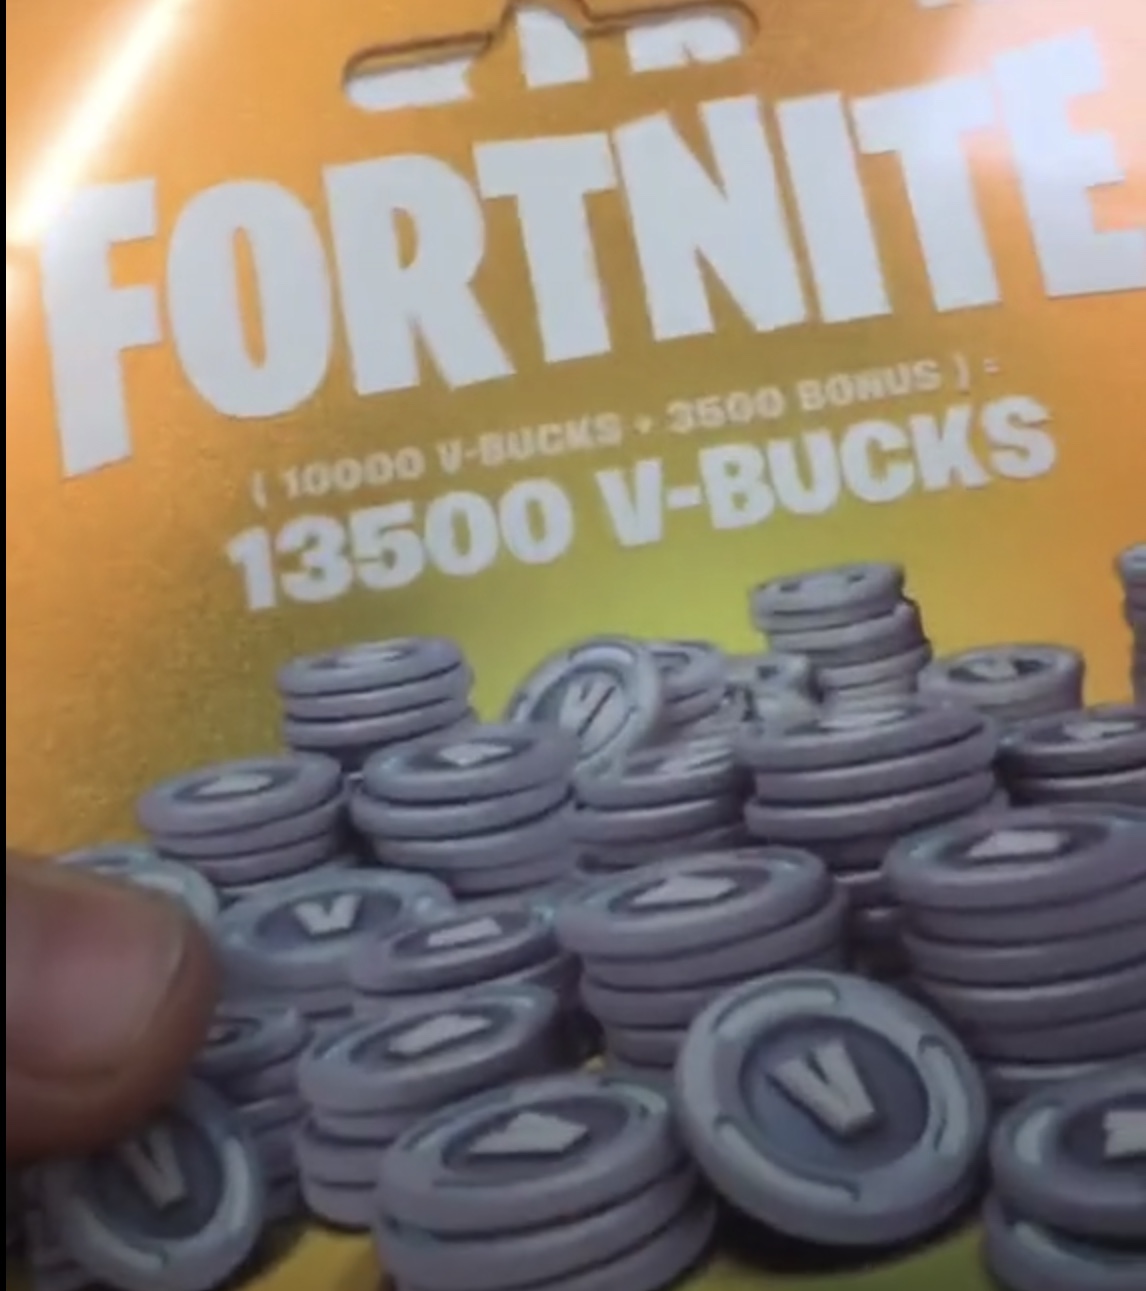 My Vbucks Code Doesn T Work I Have Proof It Is I Got A Image